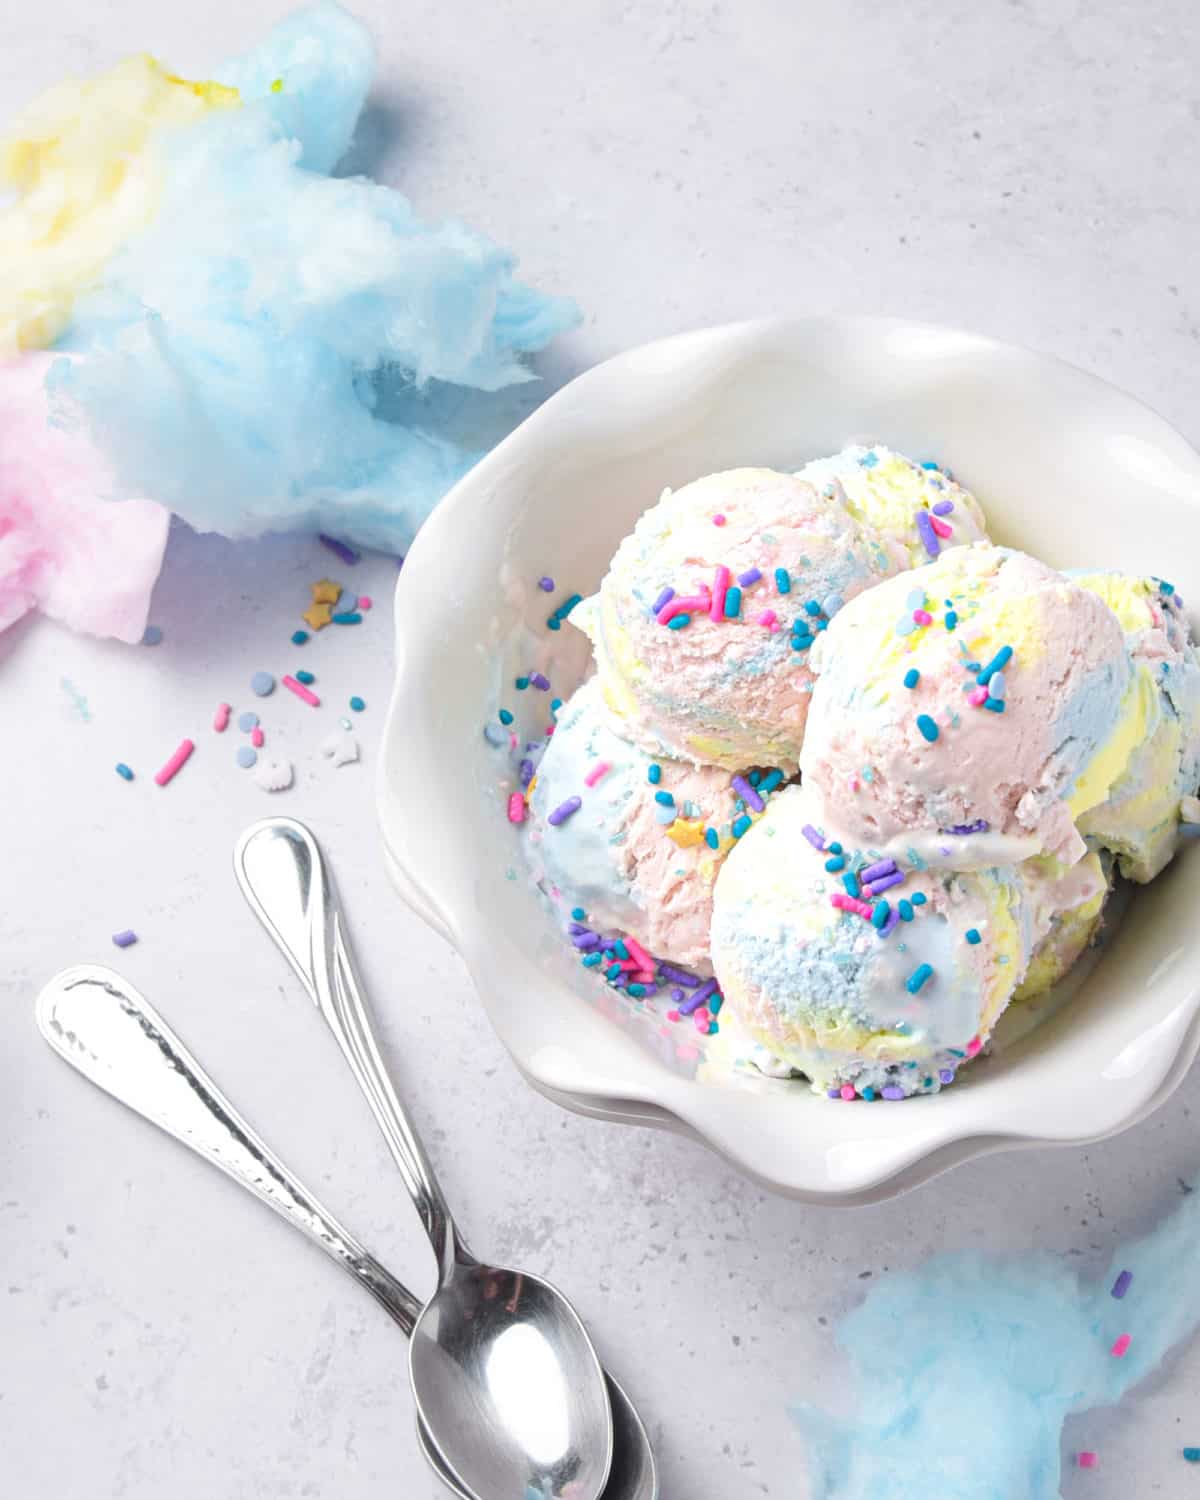 Scoops of yellow, pink, and blue colored ice cream in a bowl with two spoons.